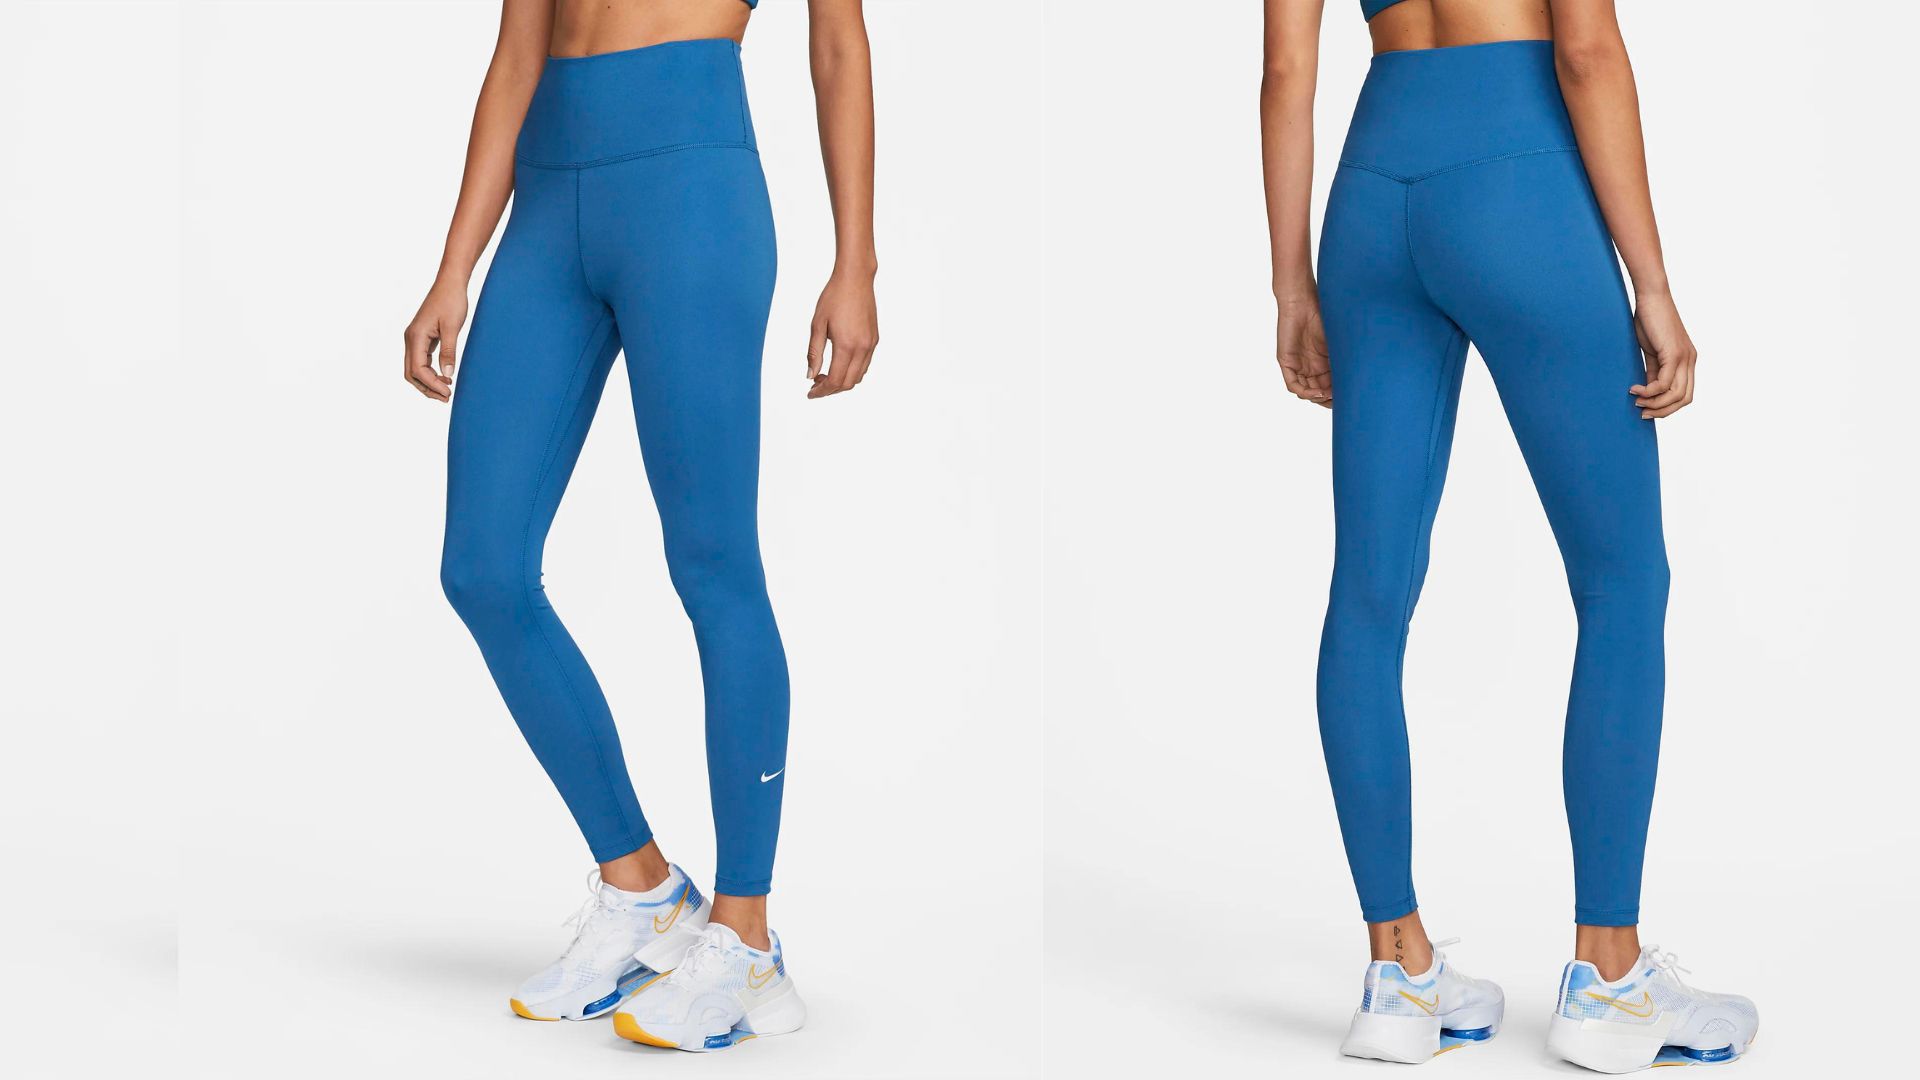 I’ve Tested Every Pair Of Nike Leggings And These Are The Best For ...